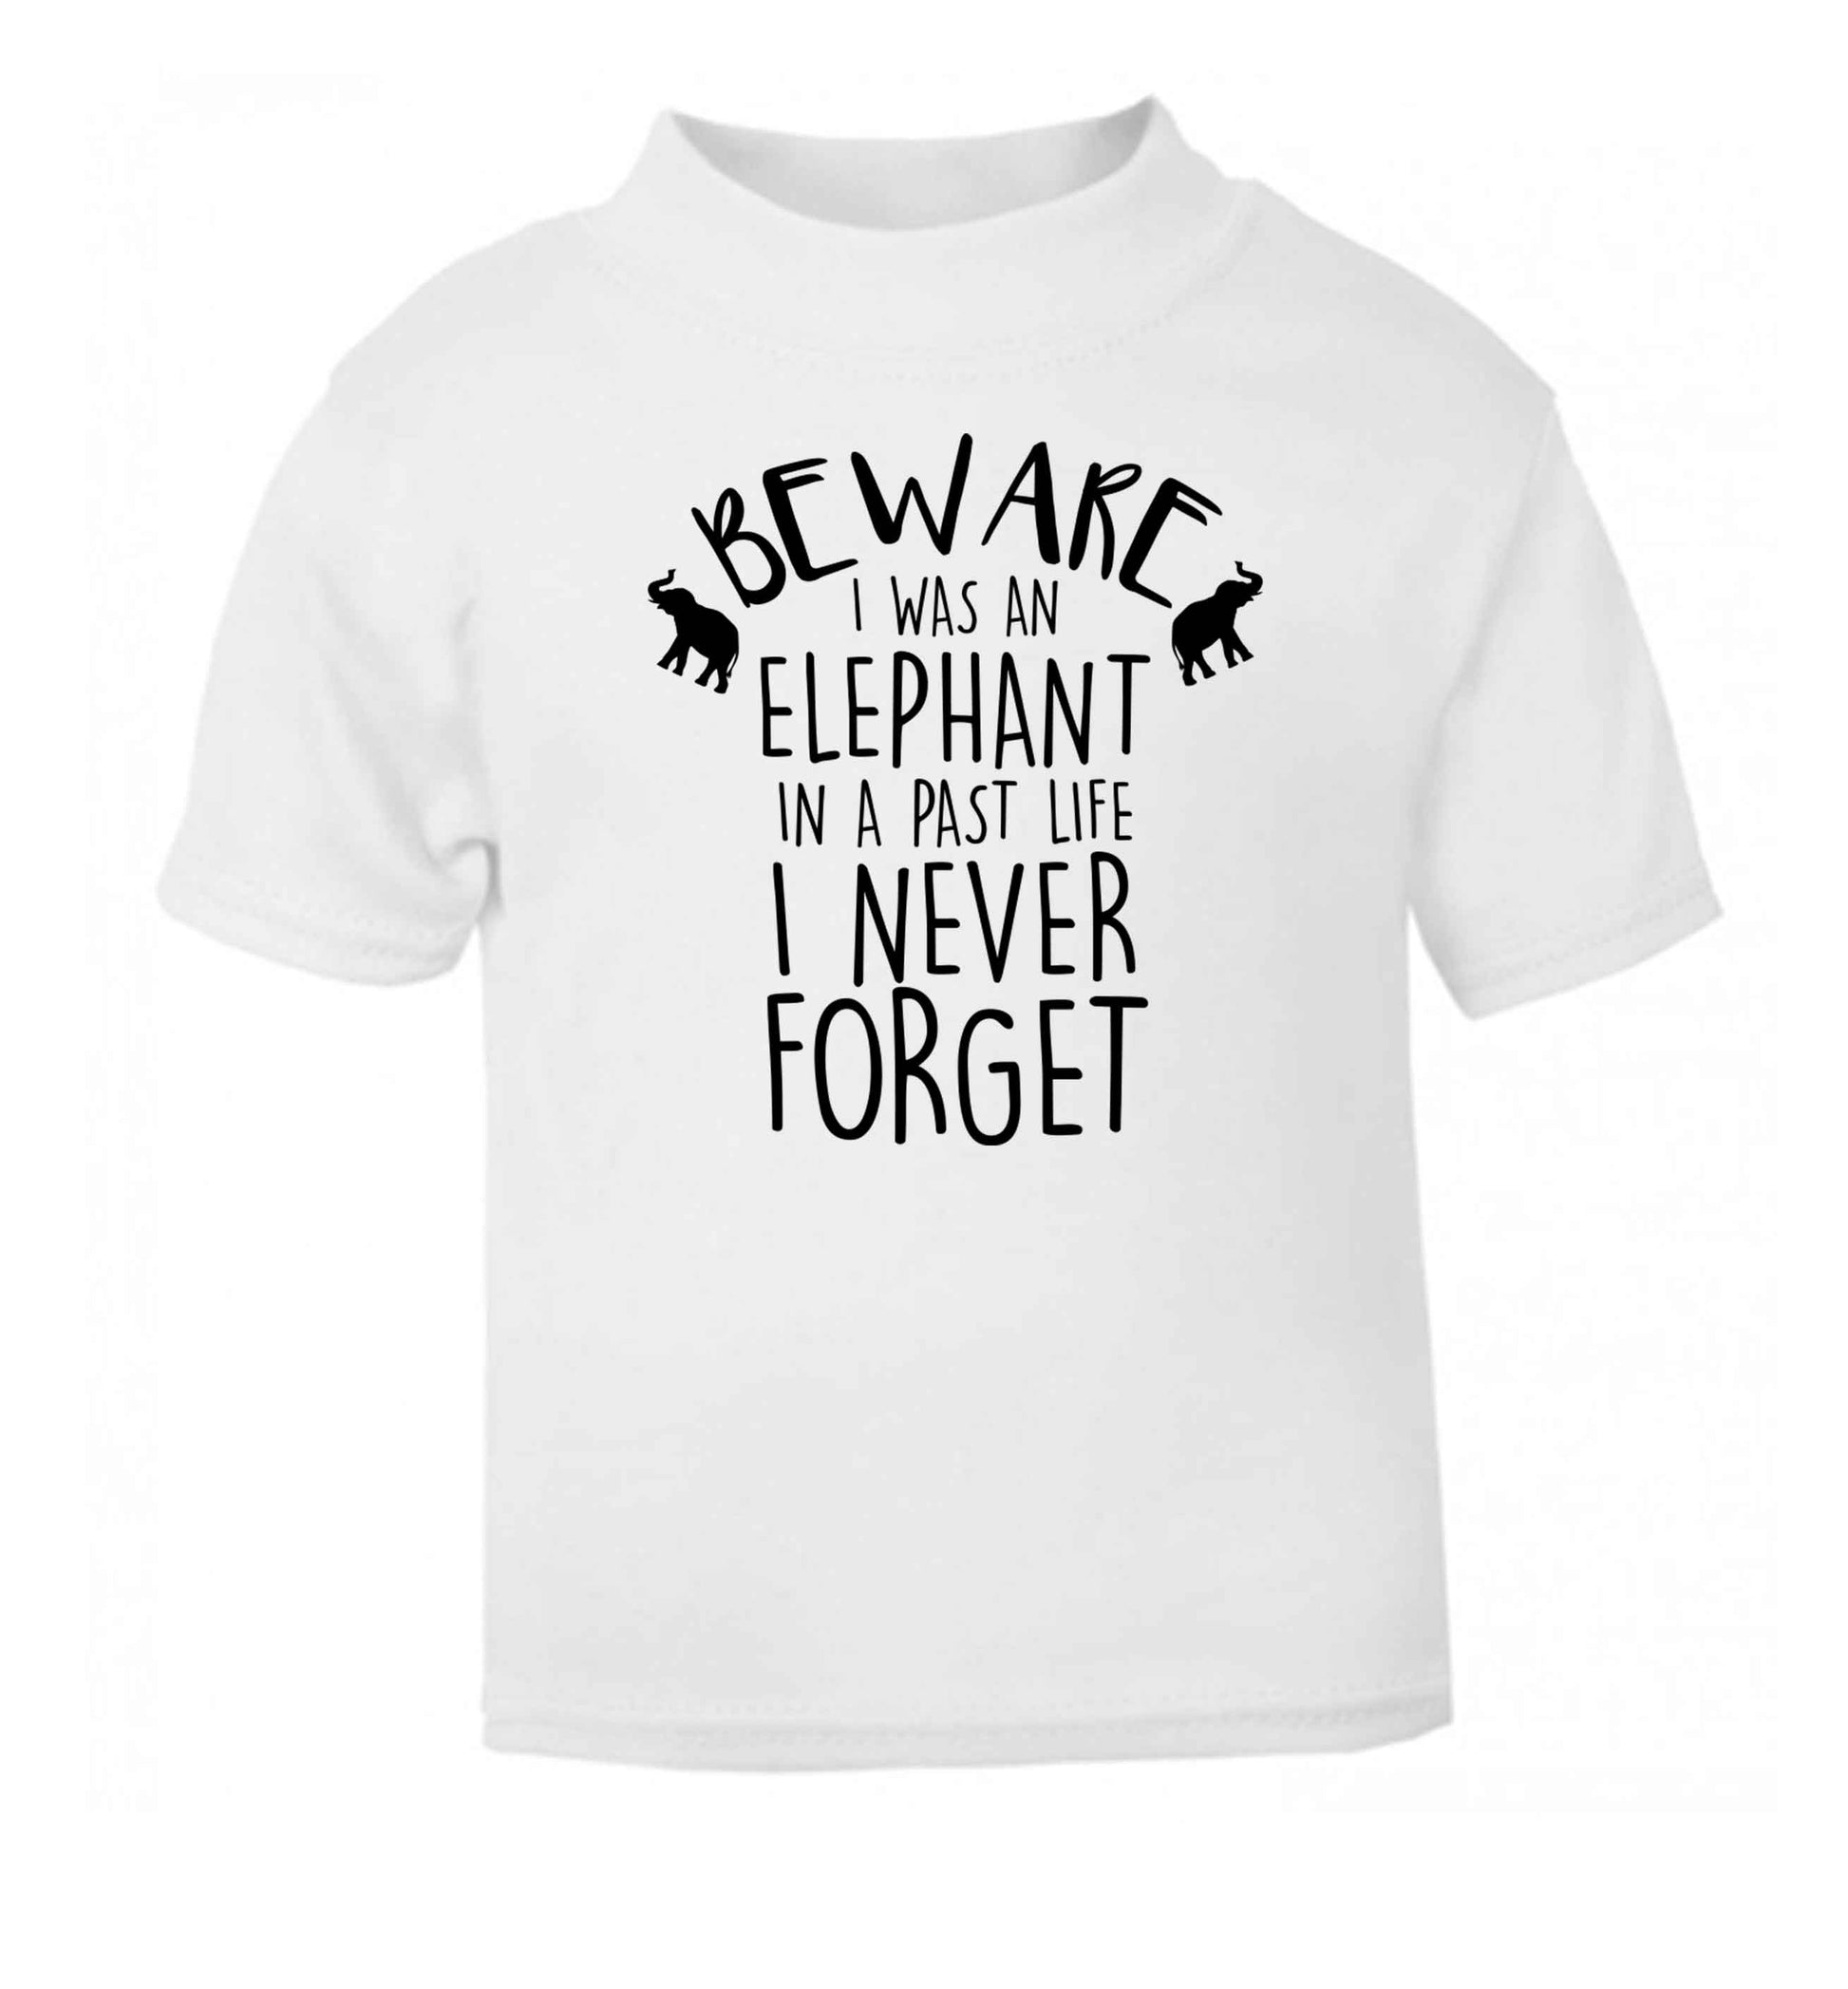 Beware I was an elephant in my past life I never forget white Baby Toddler Tshirt 2 Years